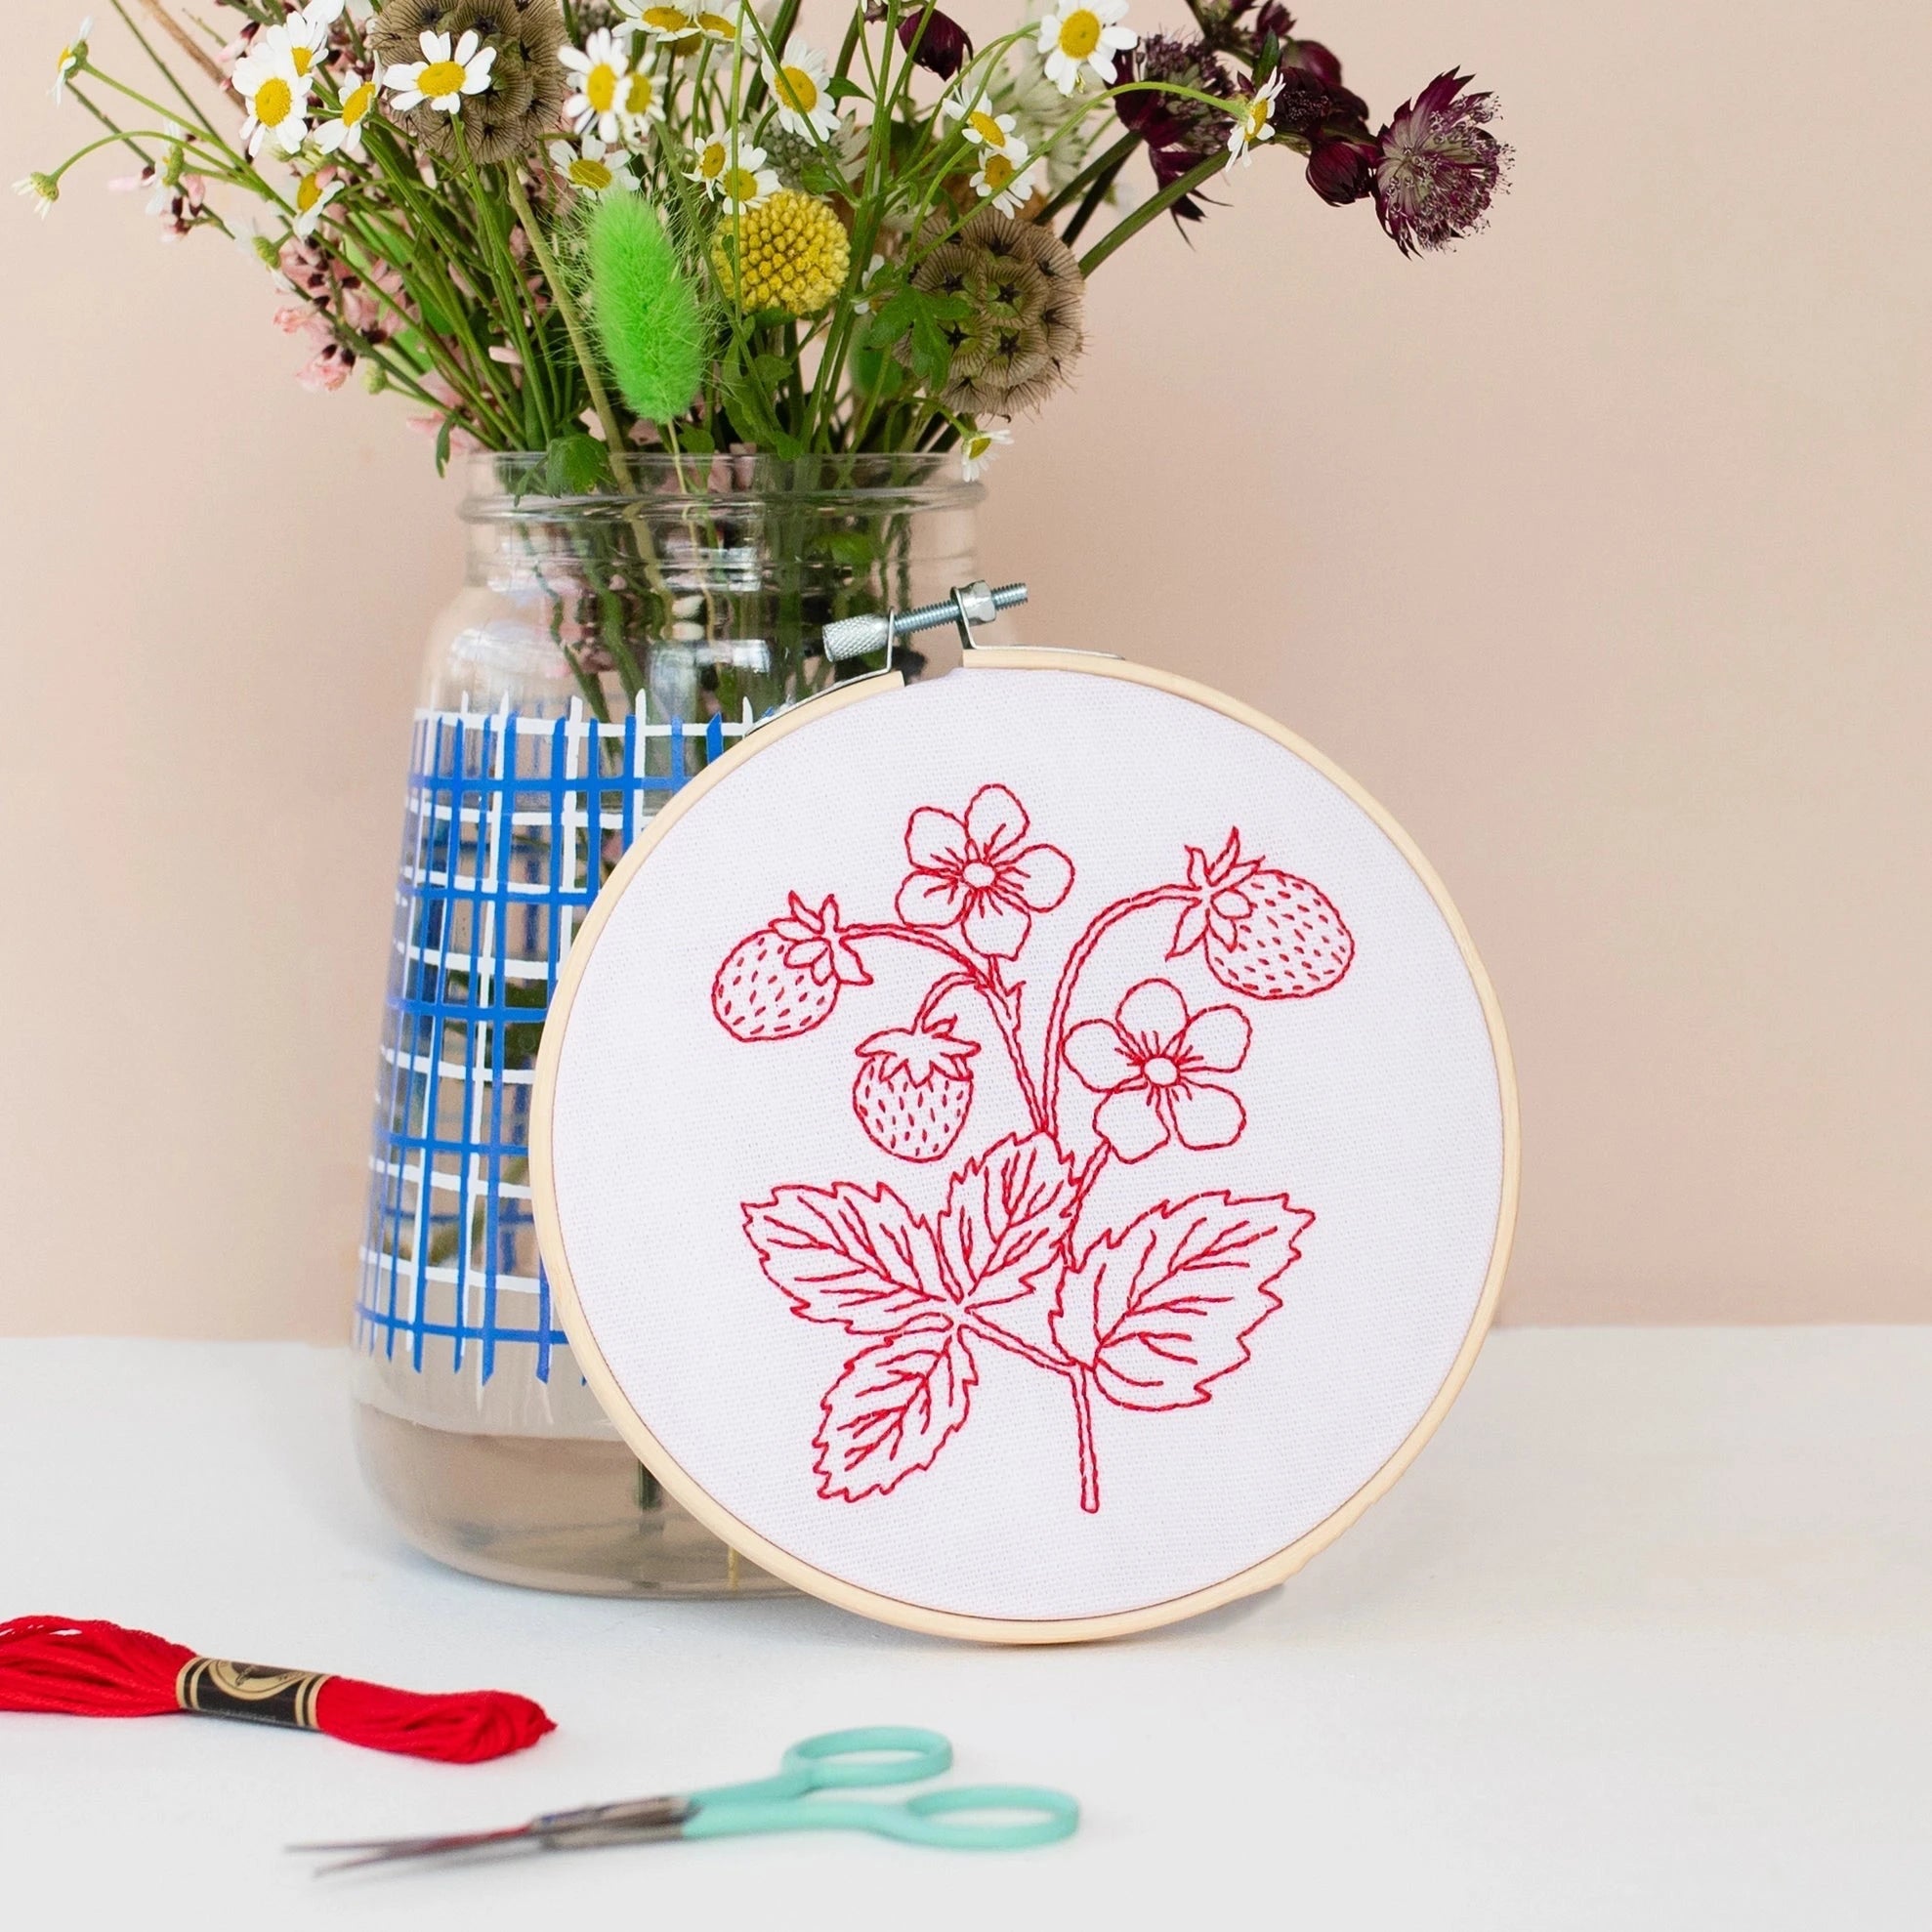 strawberry embroidery hoop leaning on a vase